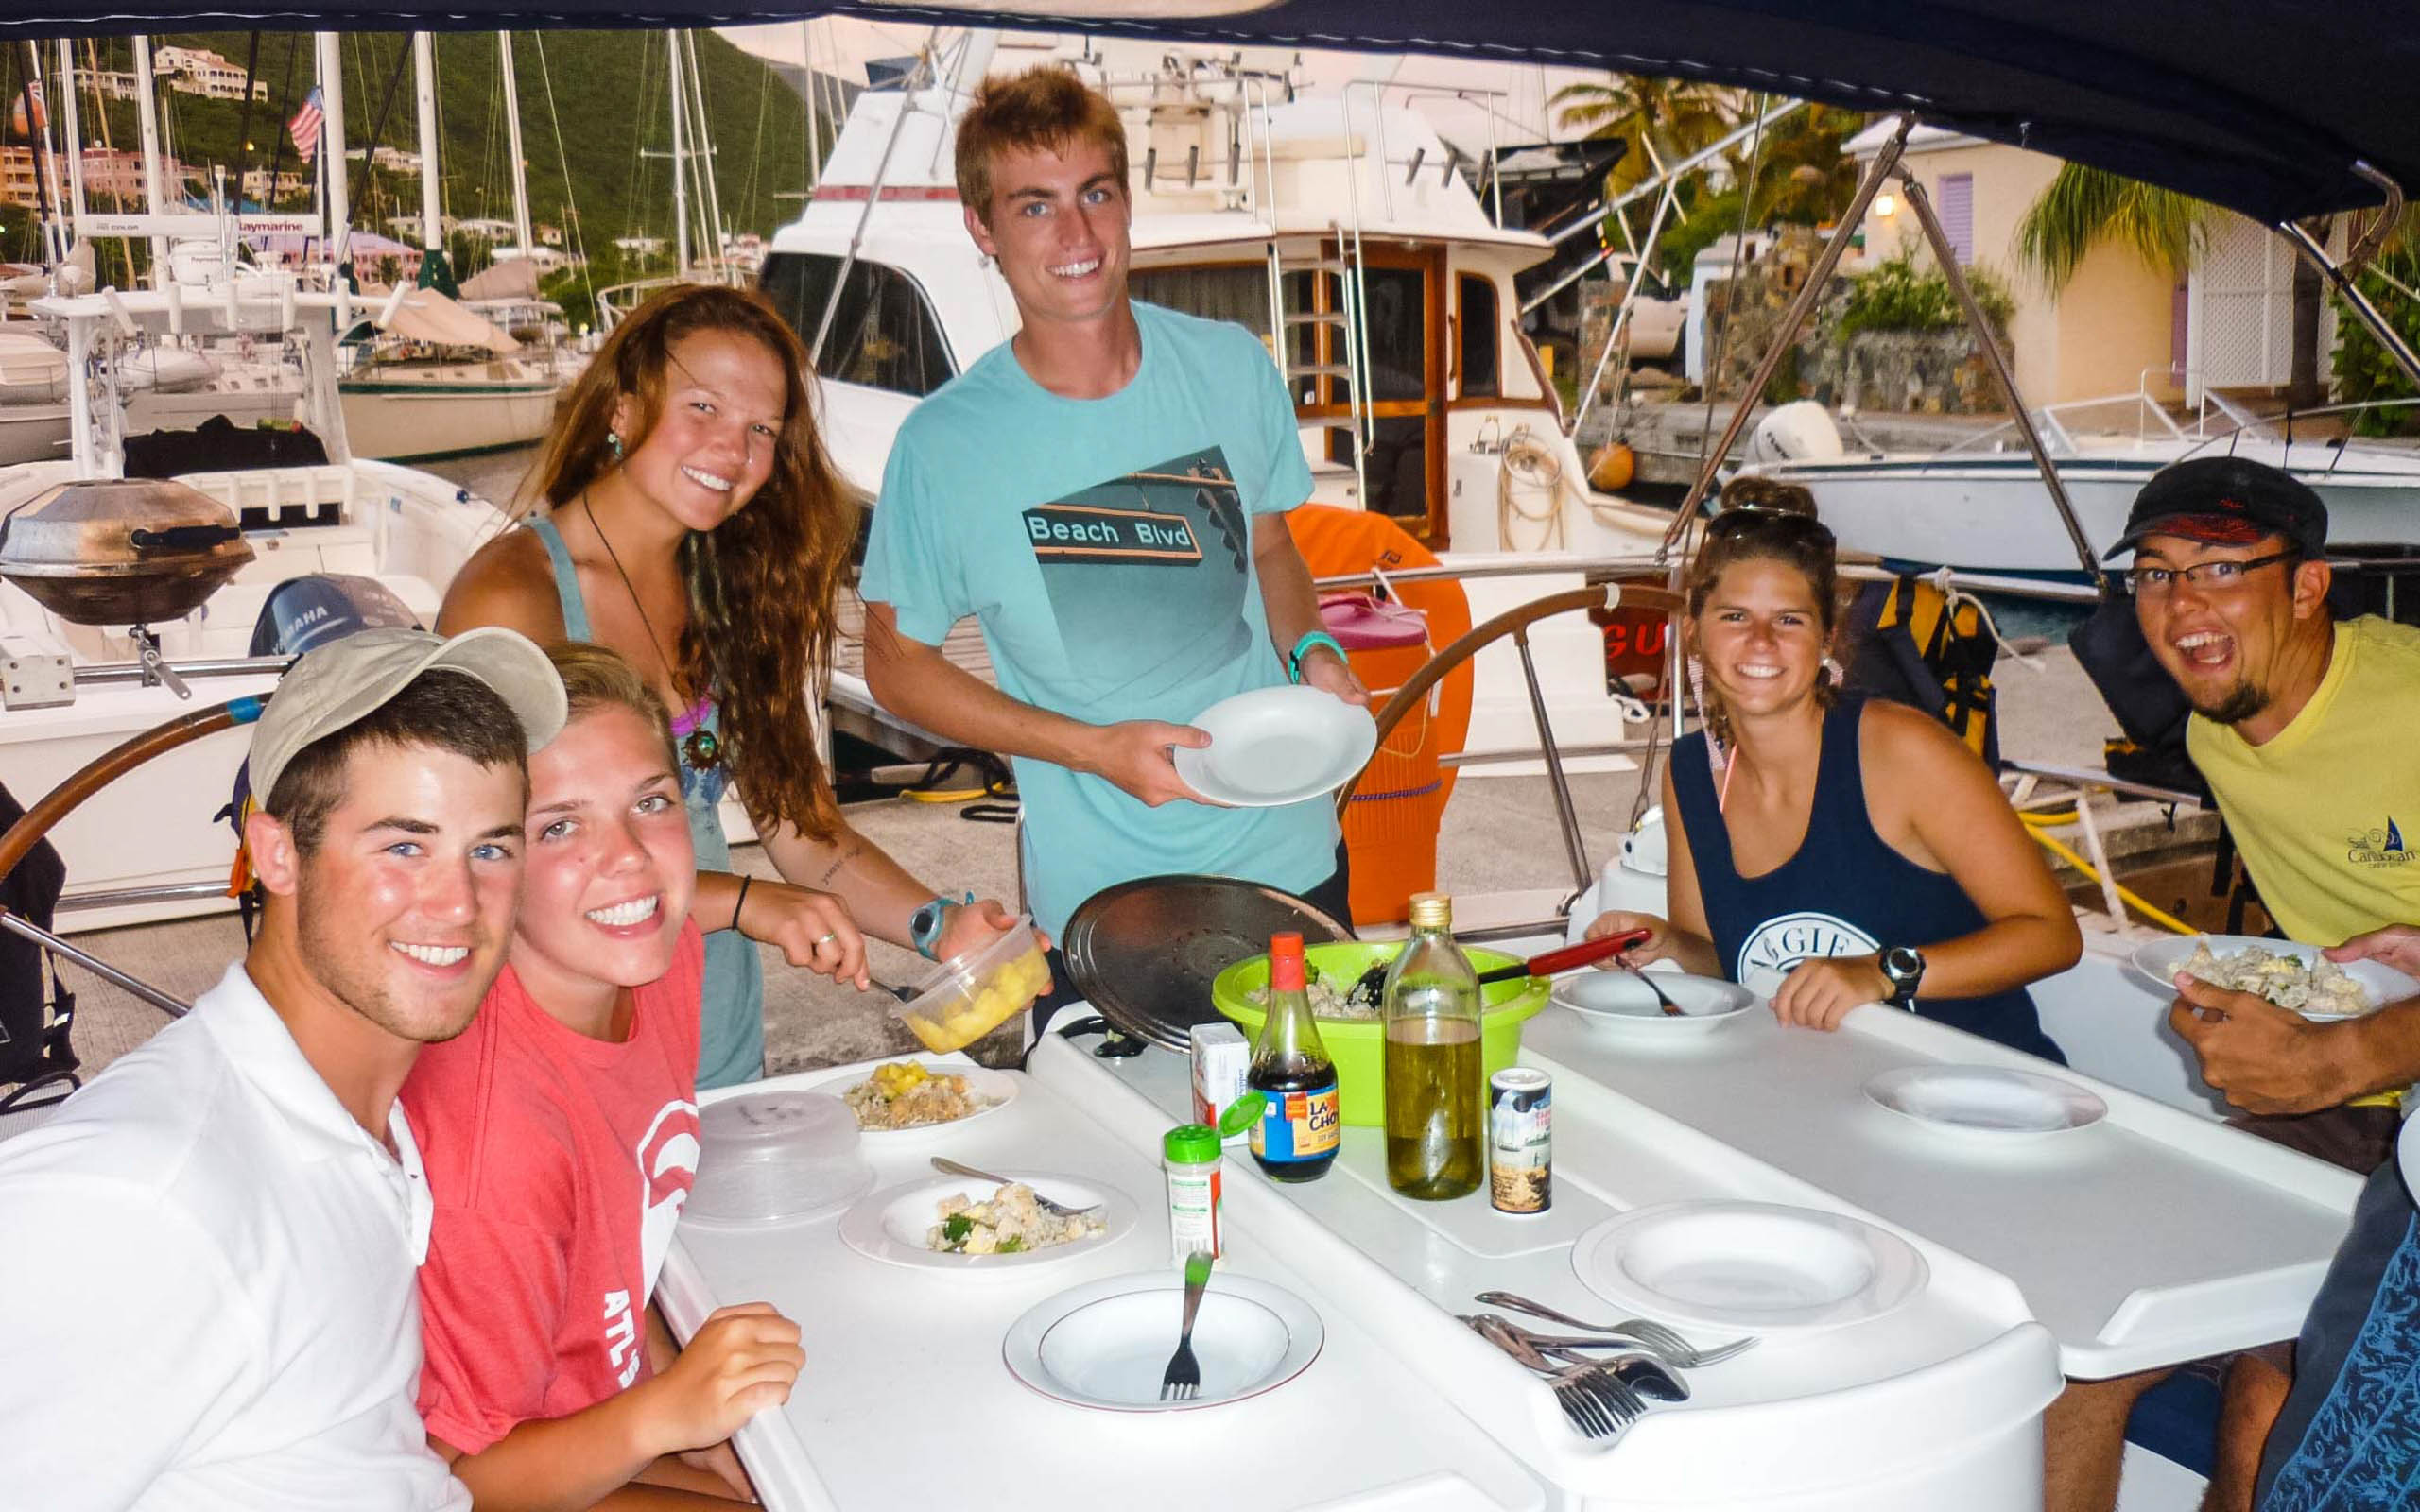 A group of people sitting at a table on a boat.